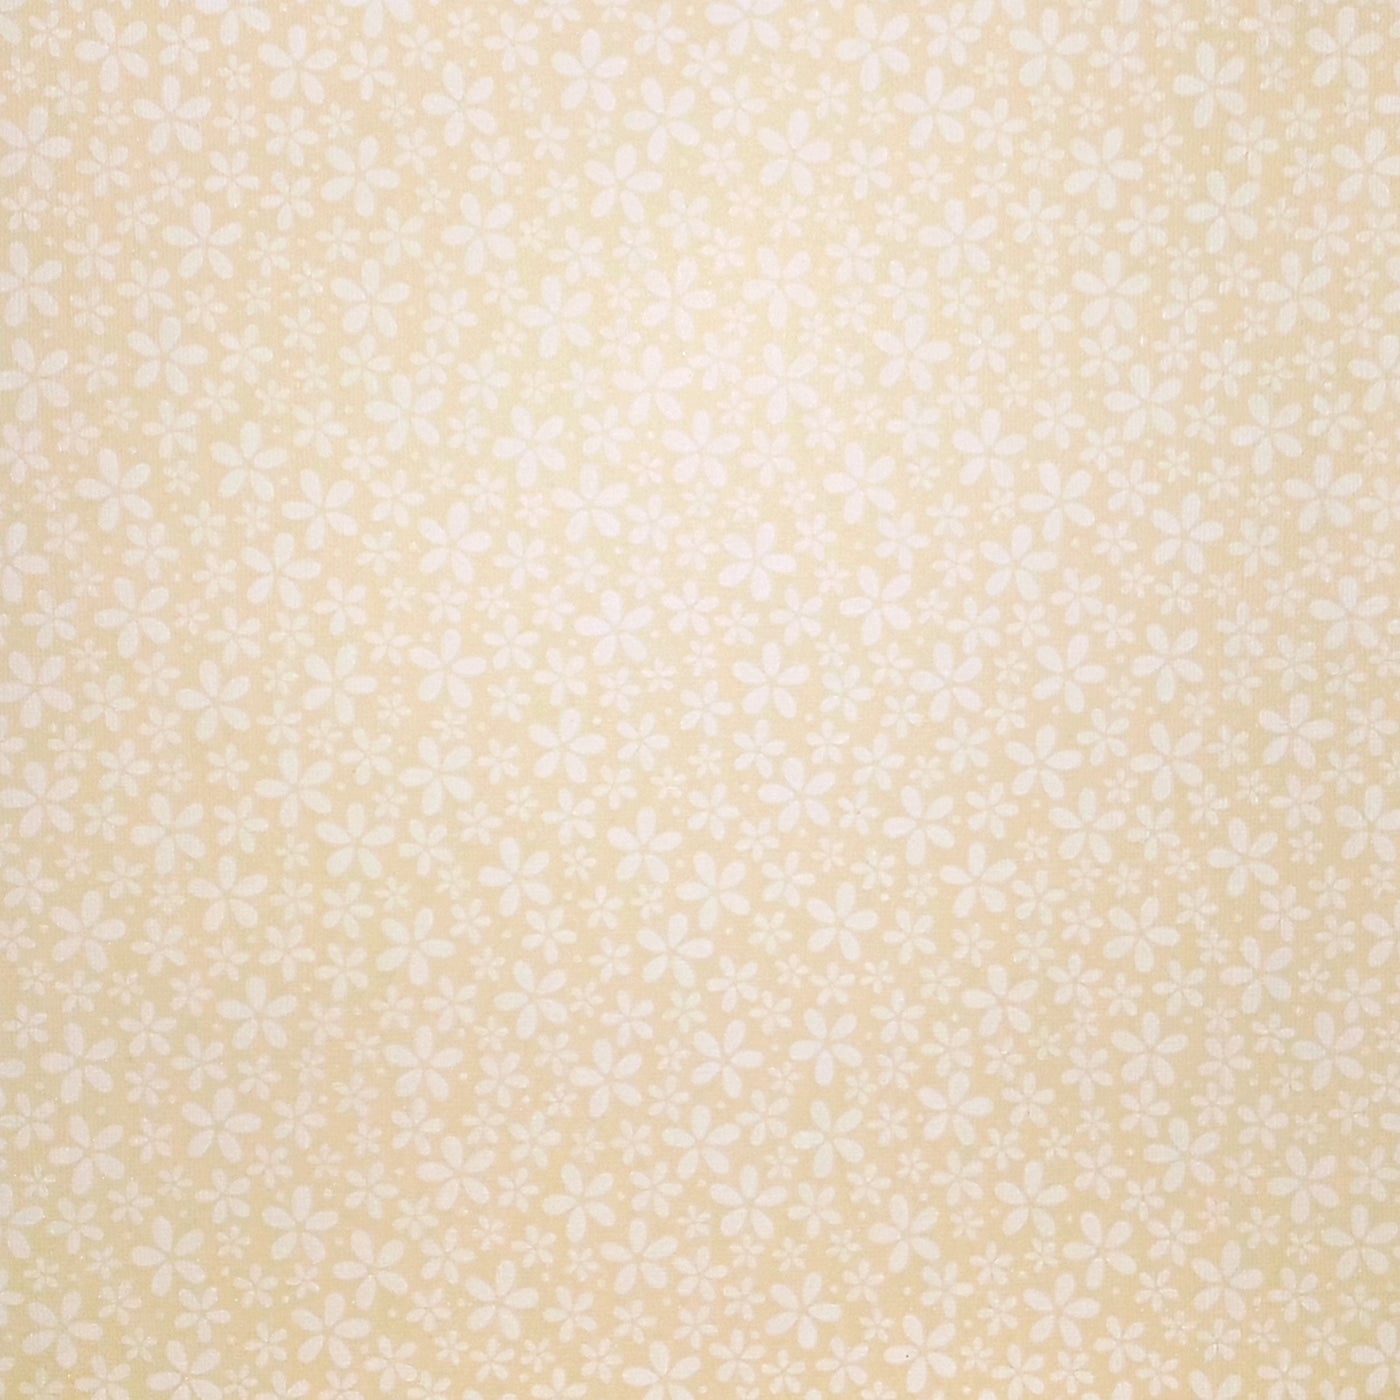 Cream Flower - patterned cardstock with white flowers on creamy yellow background - coredinations